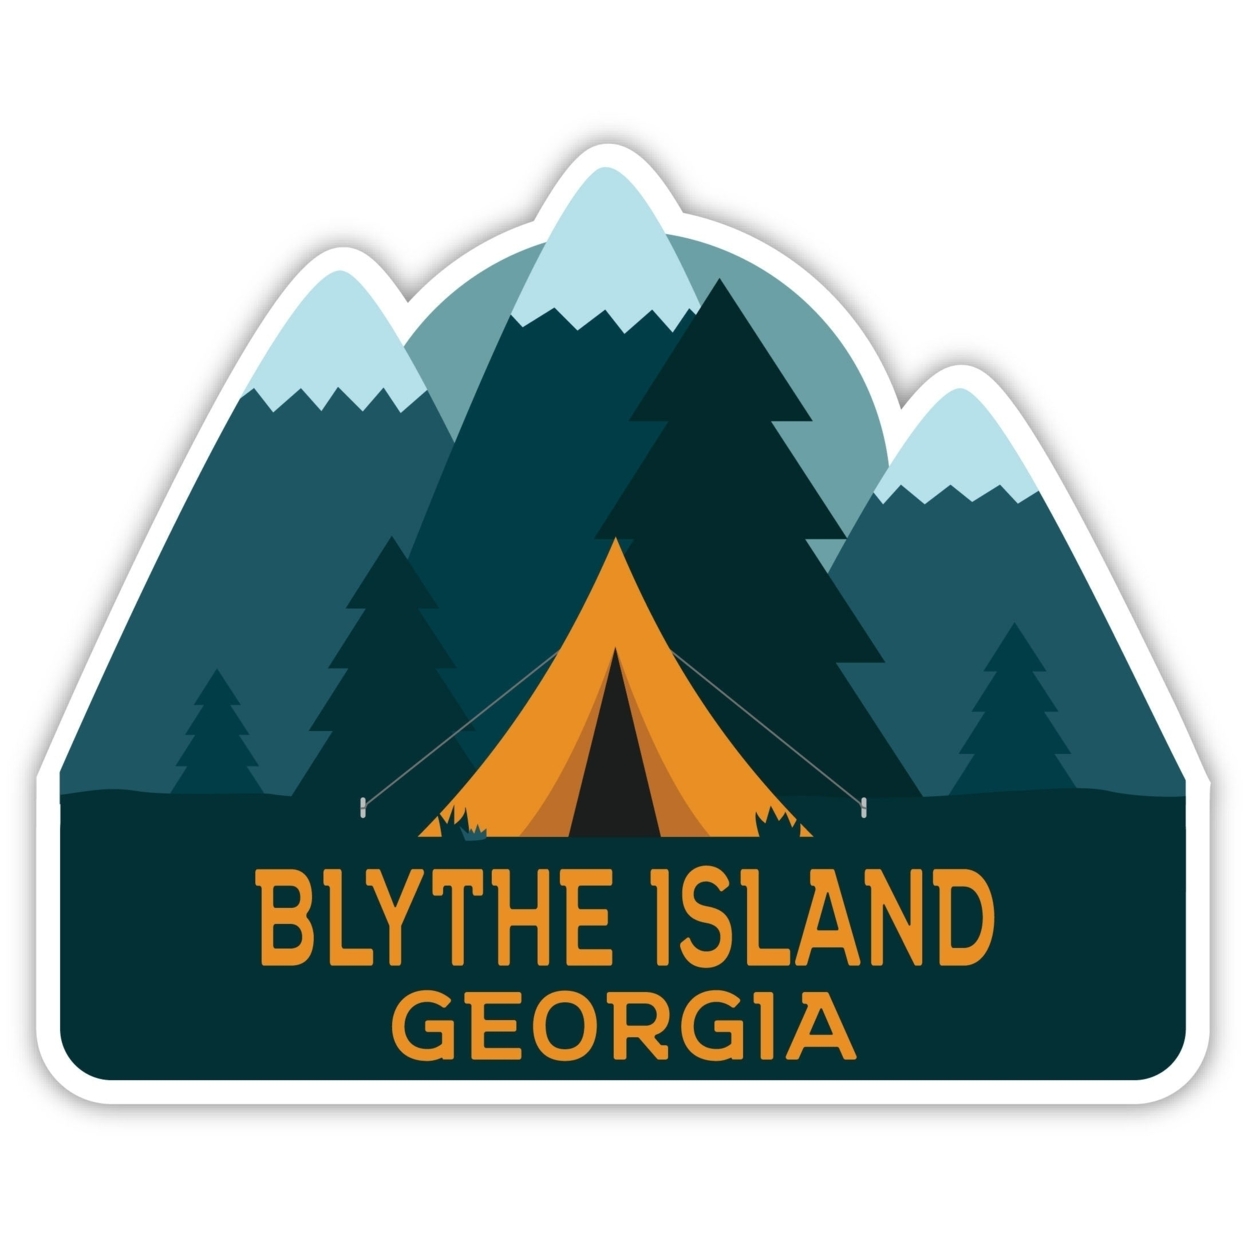 Blythe Island Georgia Souvenir Decorative Stickers (Choose Theme And Size) - Single Unit, 12-Inch, Great Outdoors